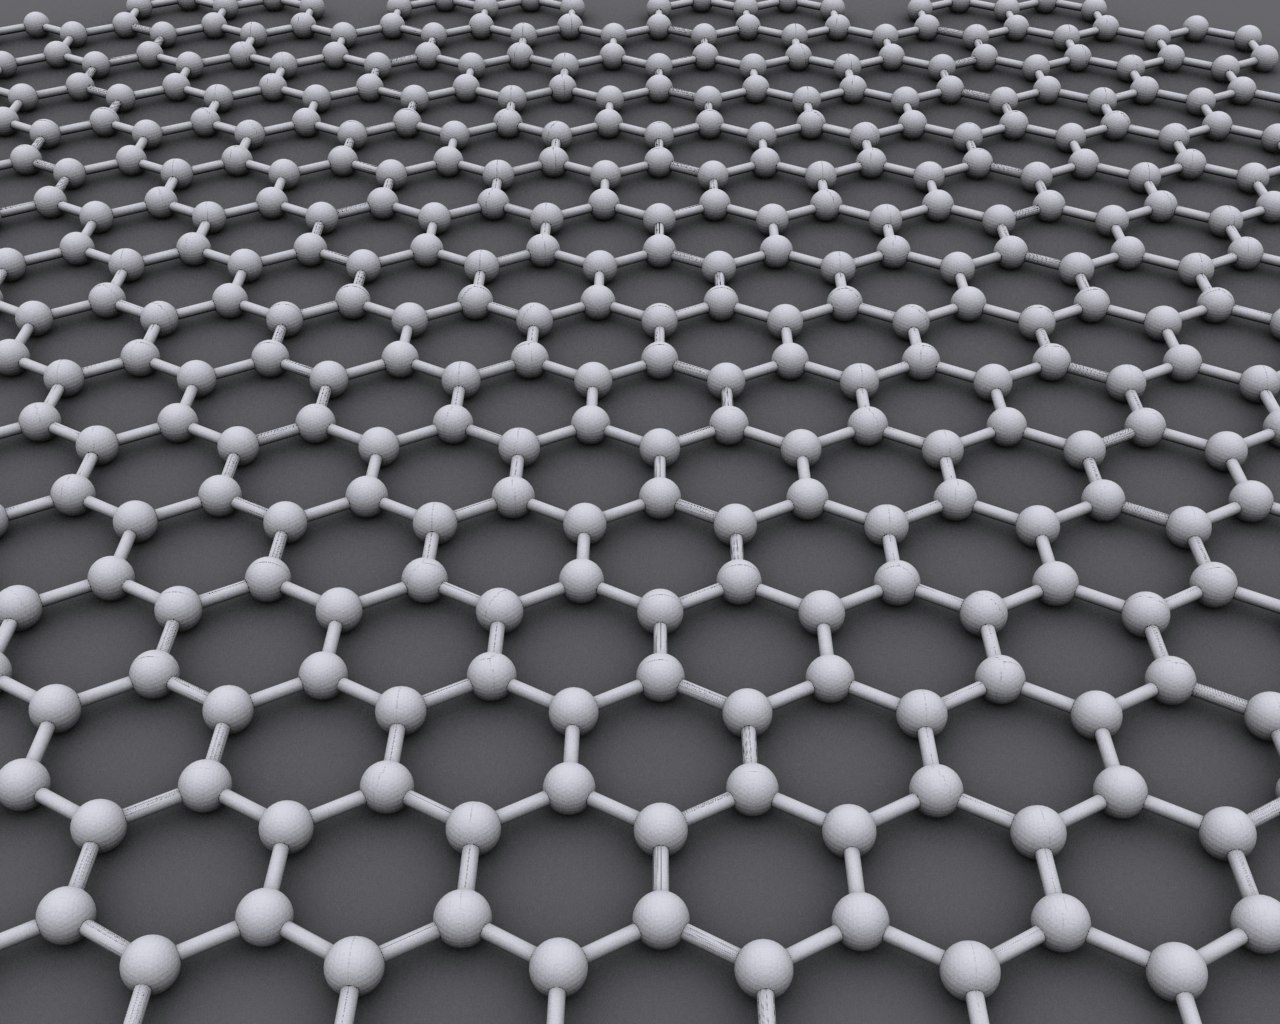 graphene - chemical structure built using molecules